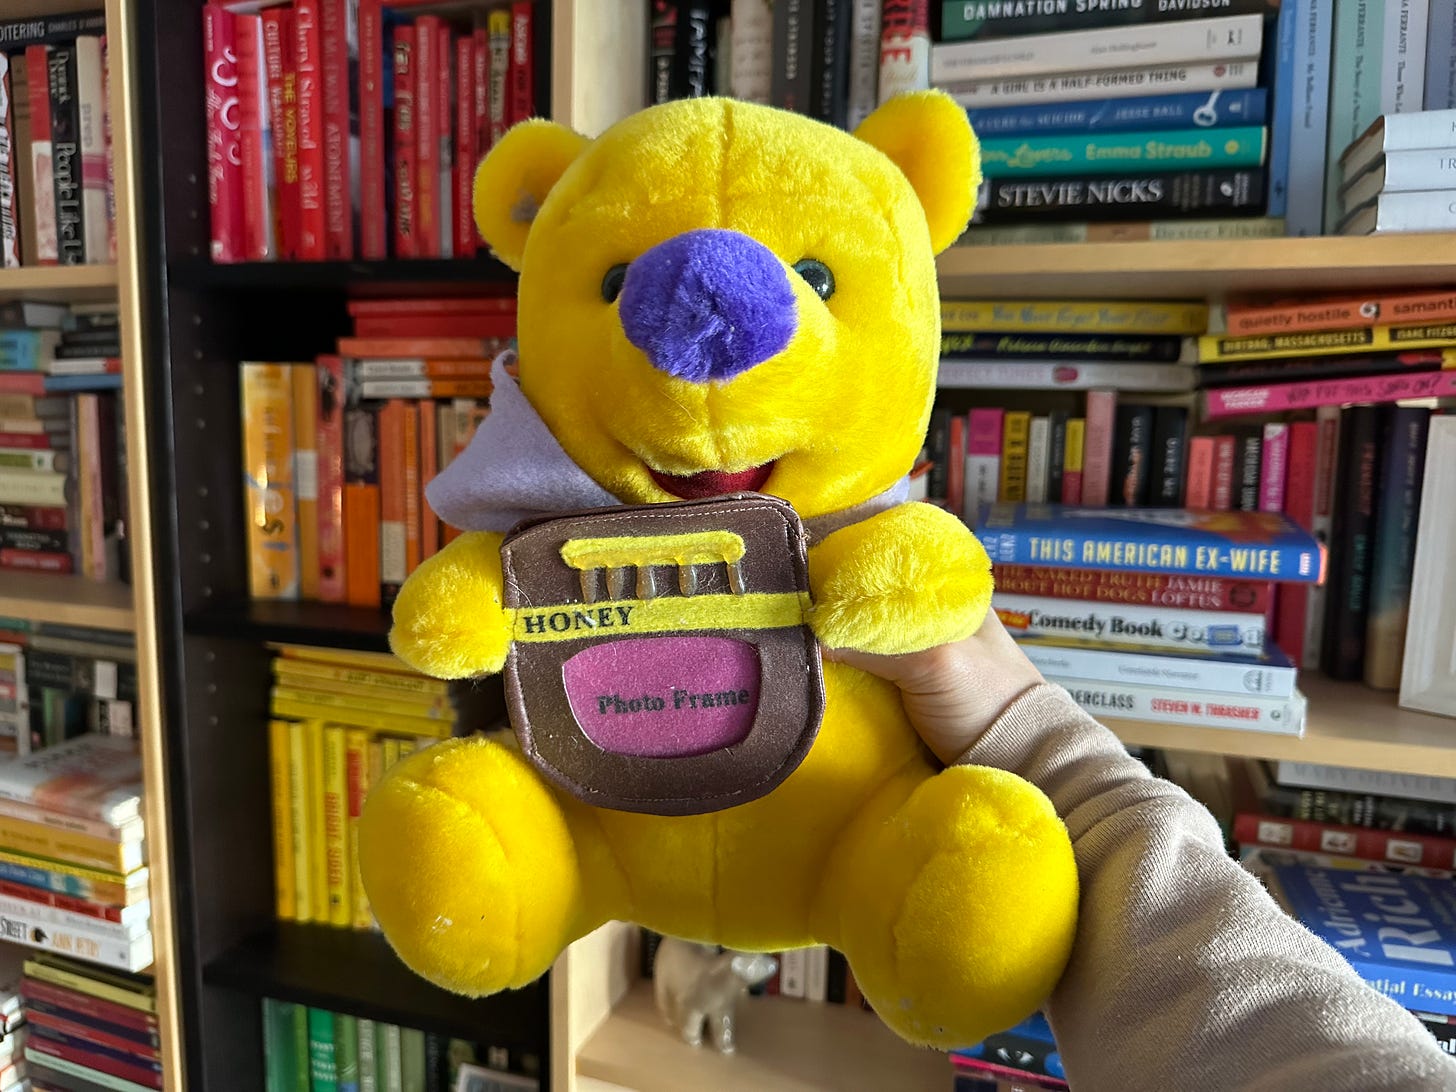 A photo of the generic stuffed bear who mocks me to this day.